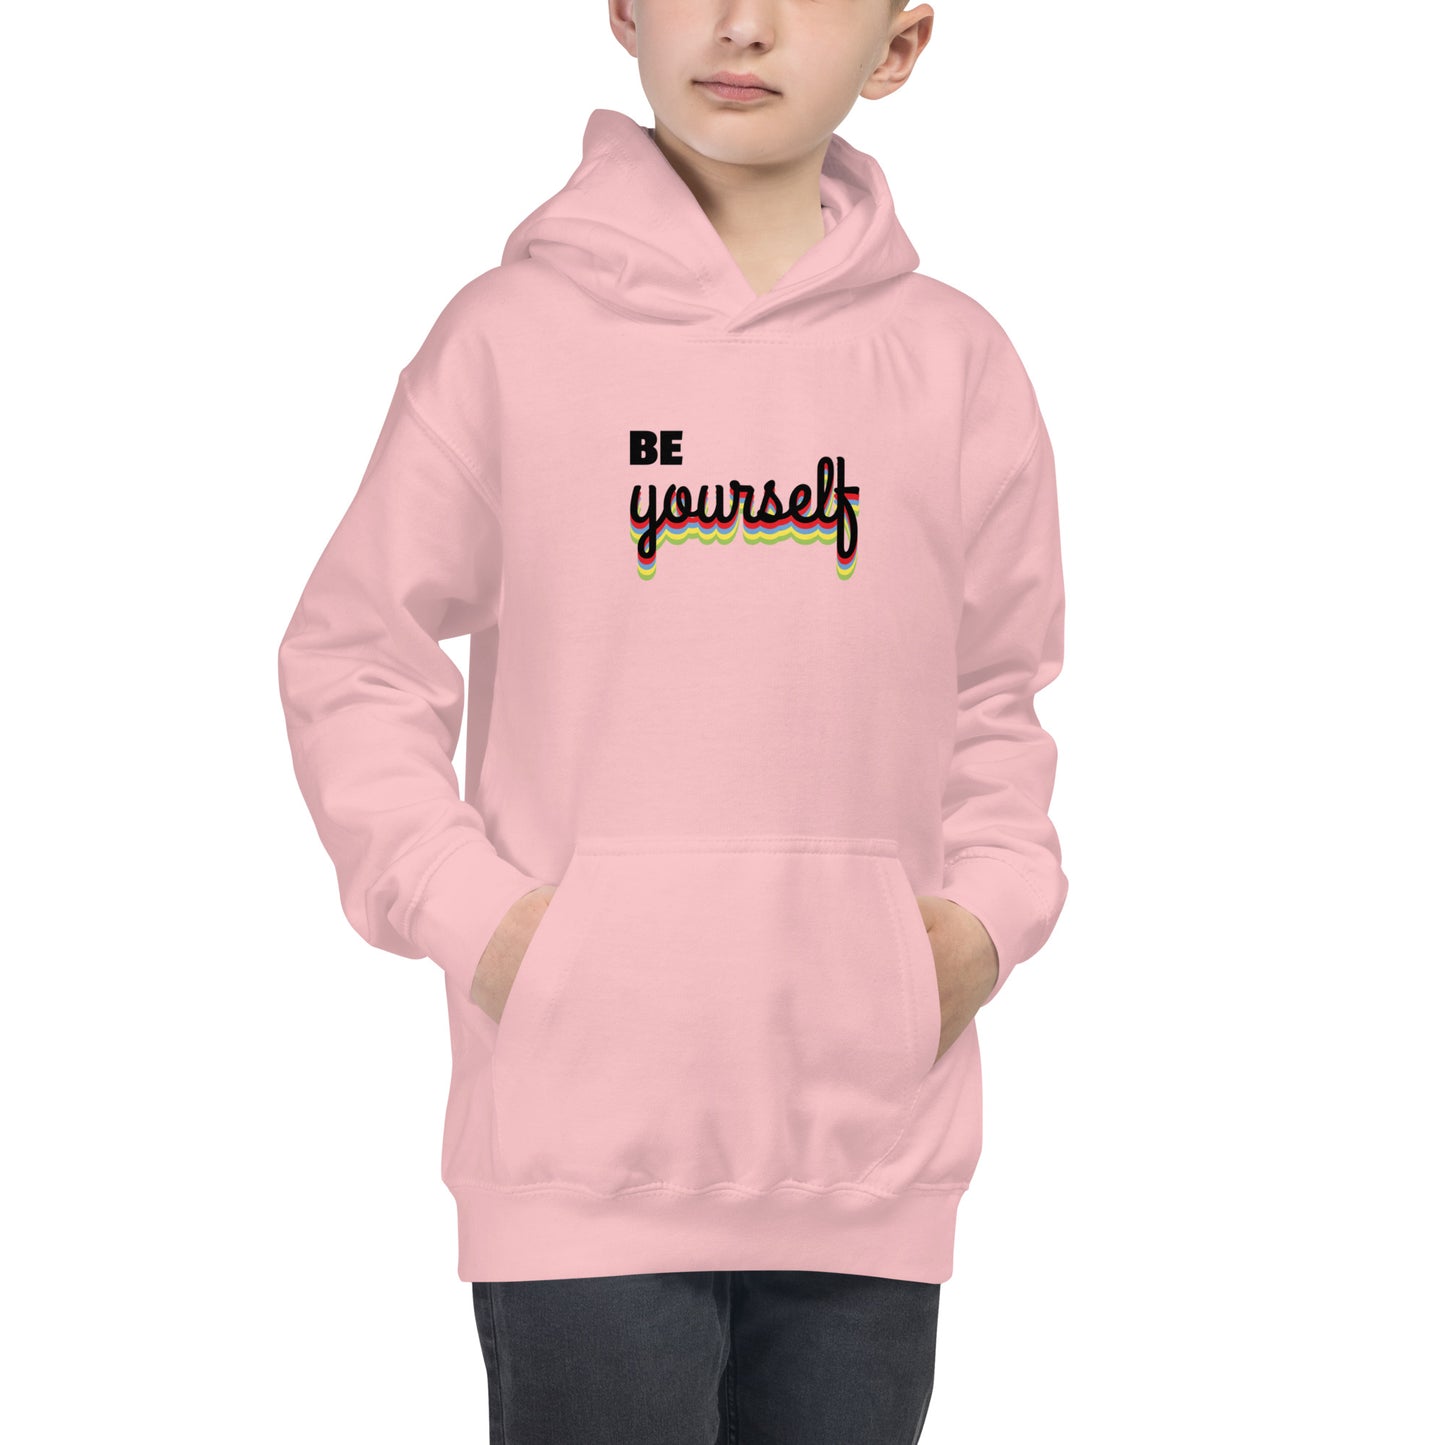 Kids Graphic Hoodie in Be Yourself